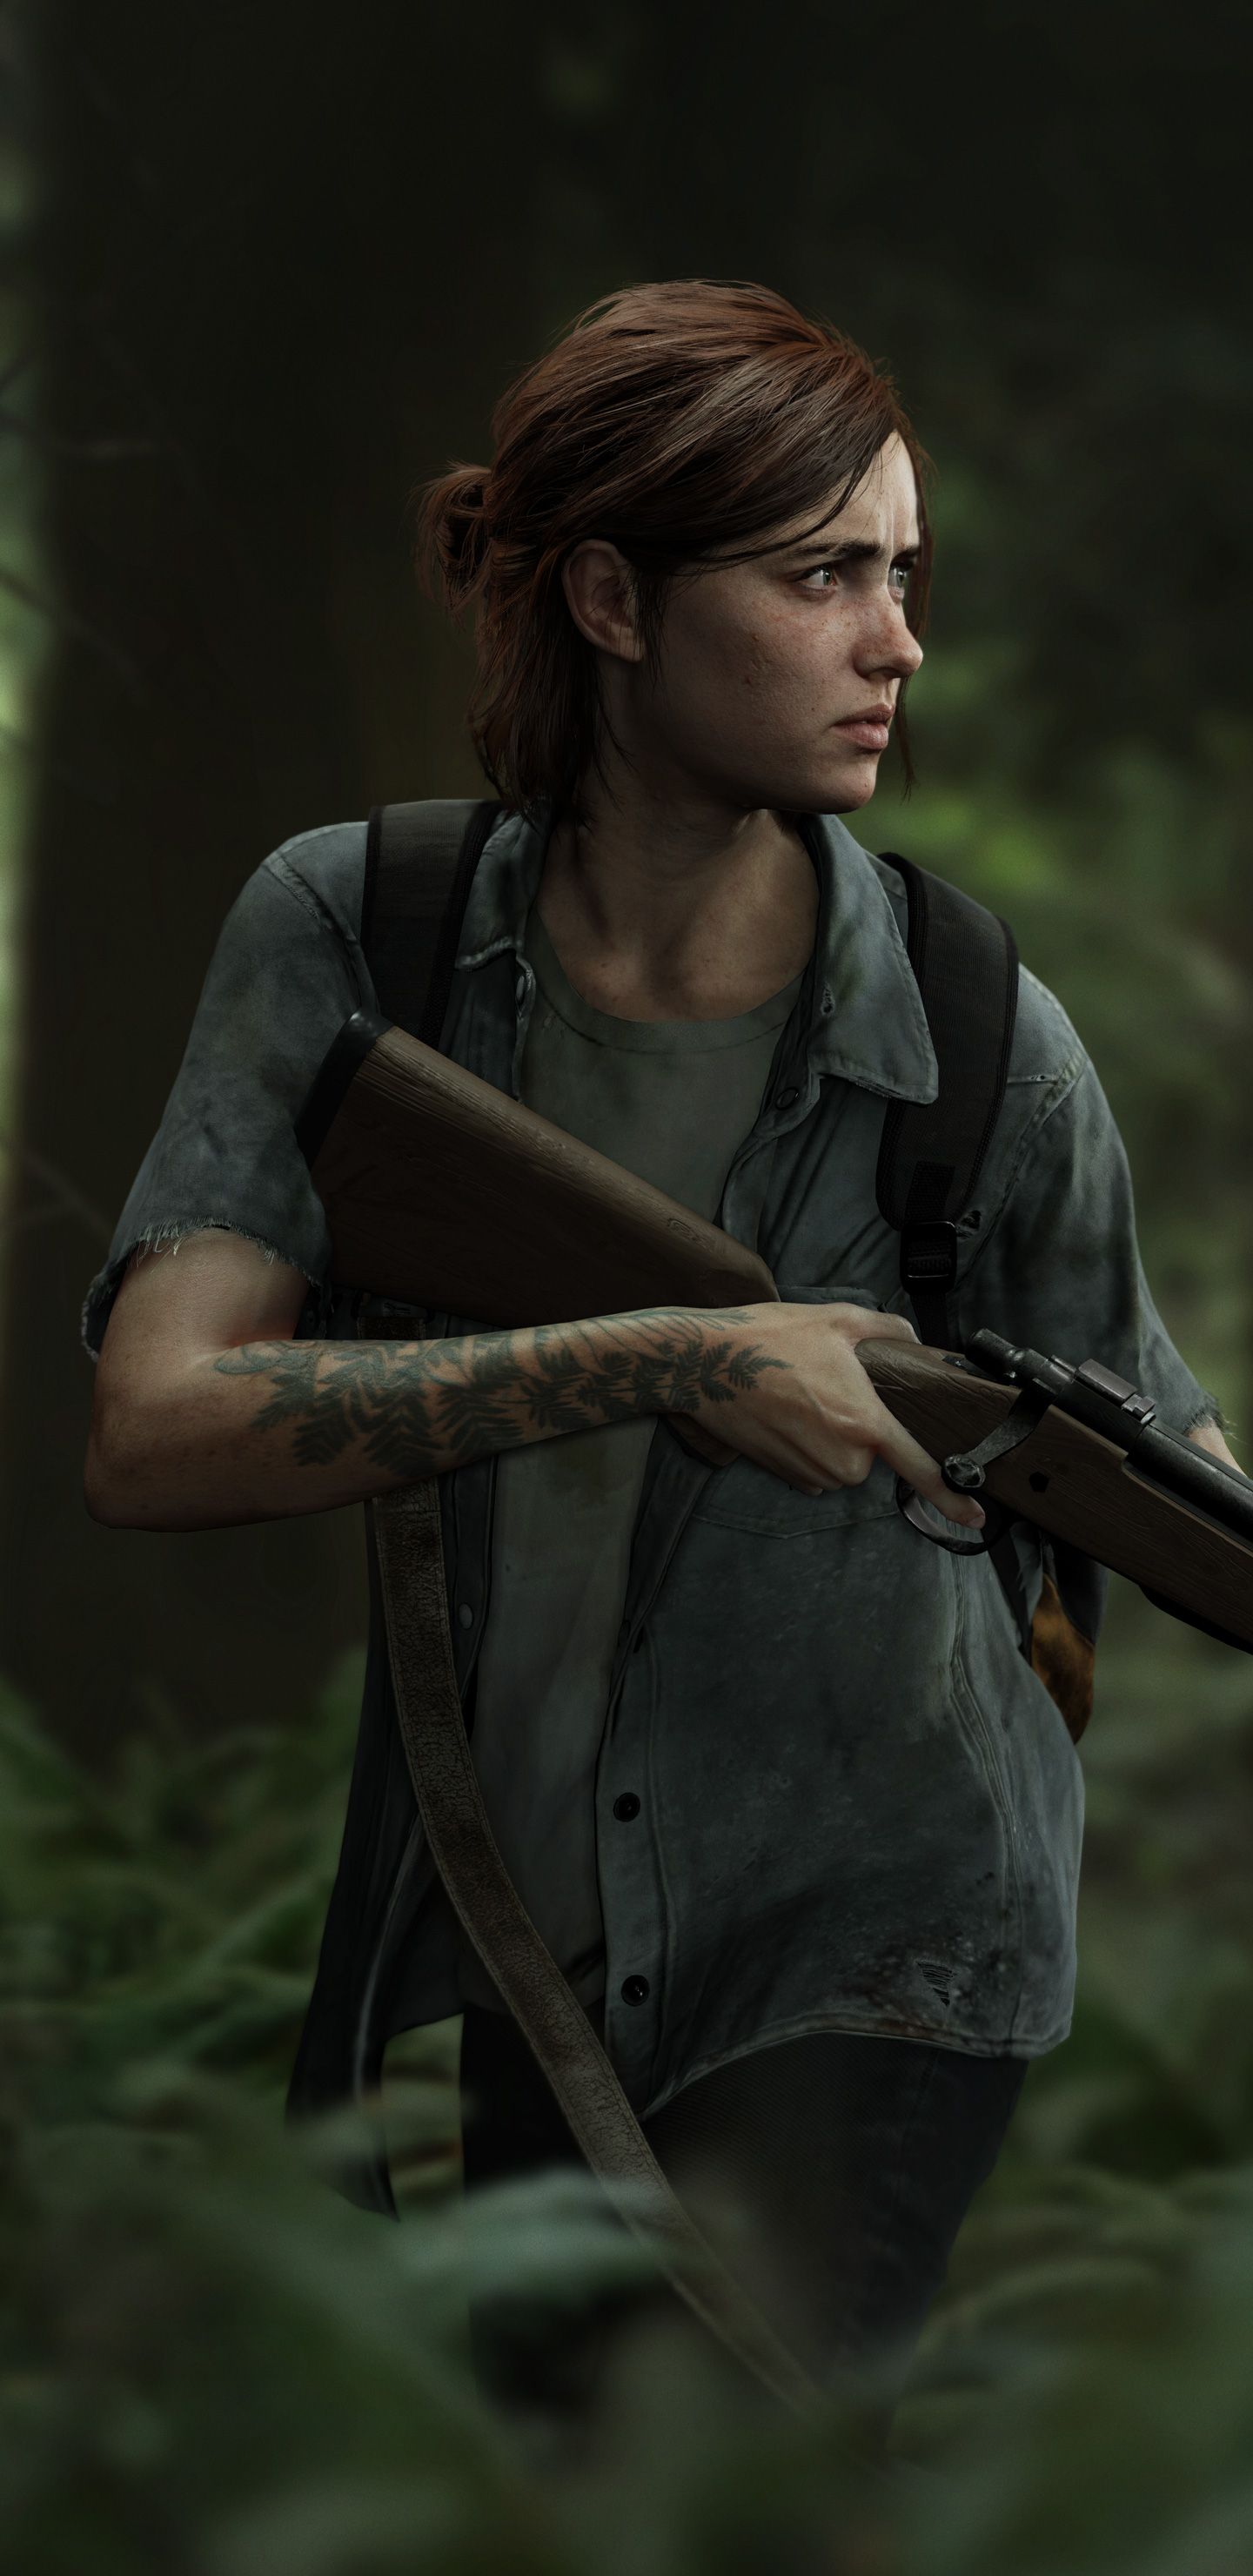 Ellie from The Last of Us Part II 1440x2960 Music IndieArtist